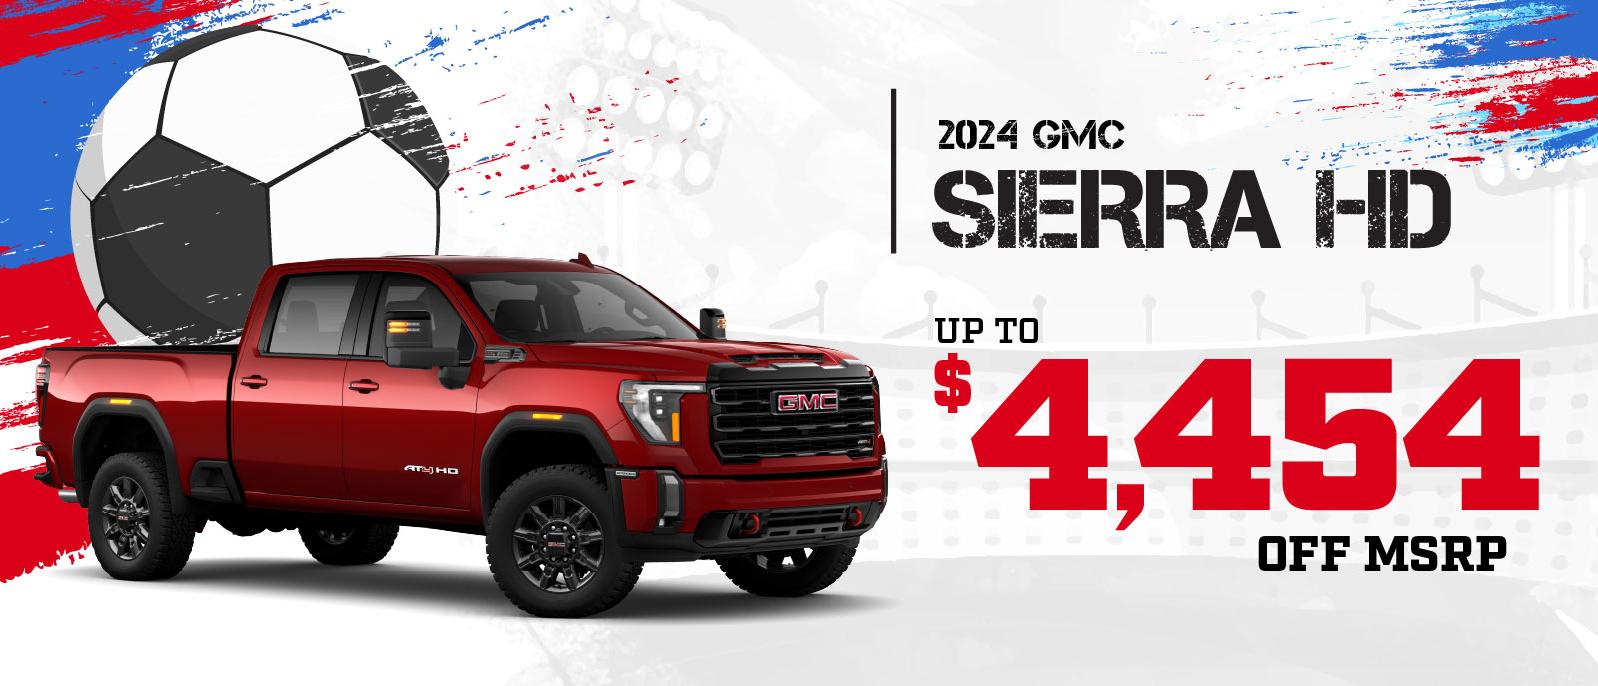 2024 GMC Sierra HD - Save UP TO $4454